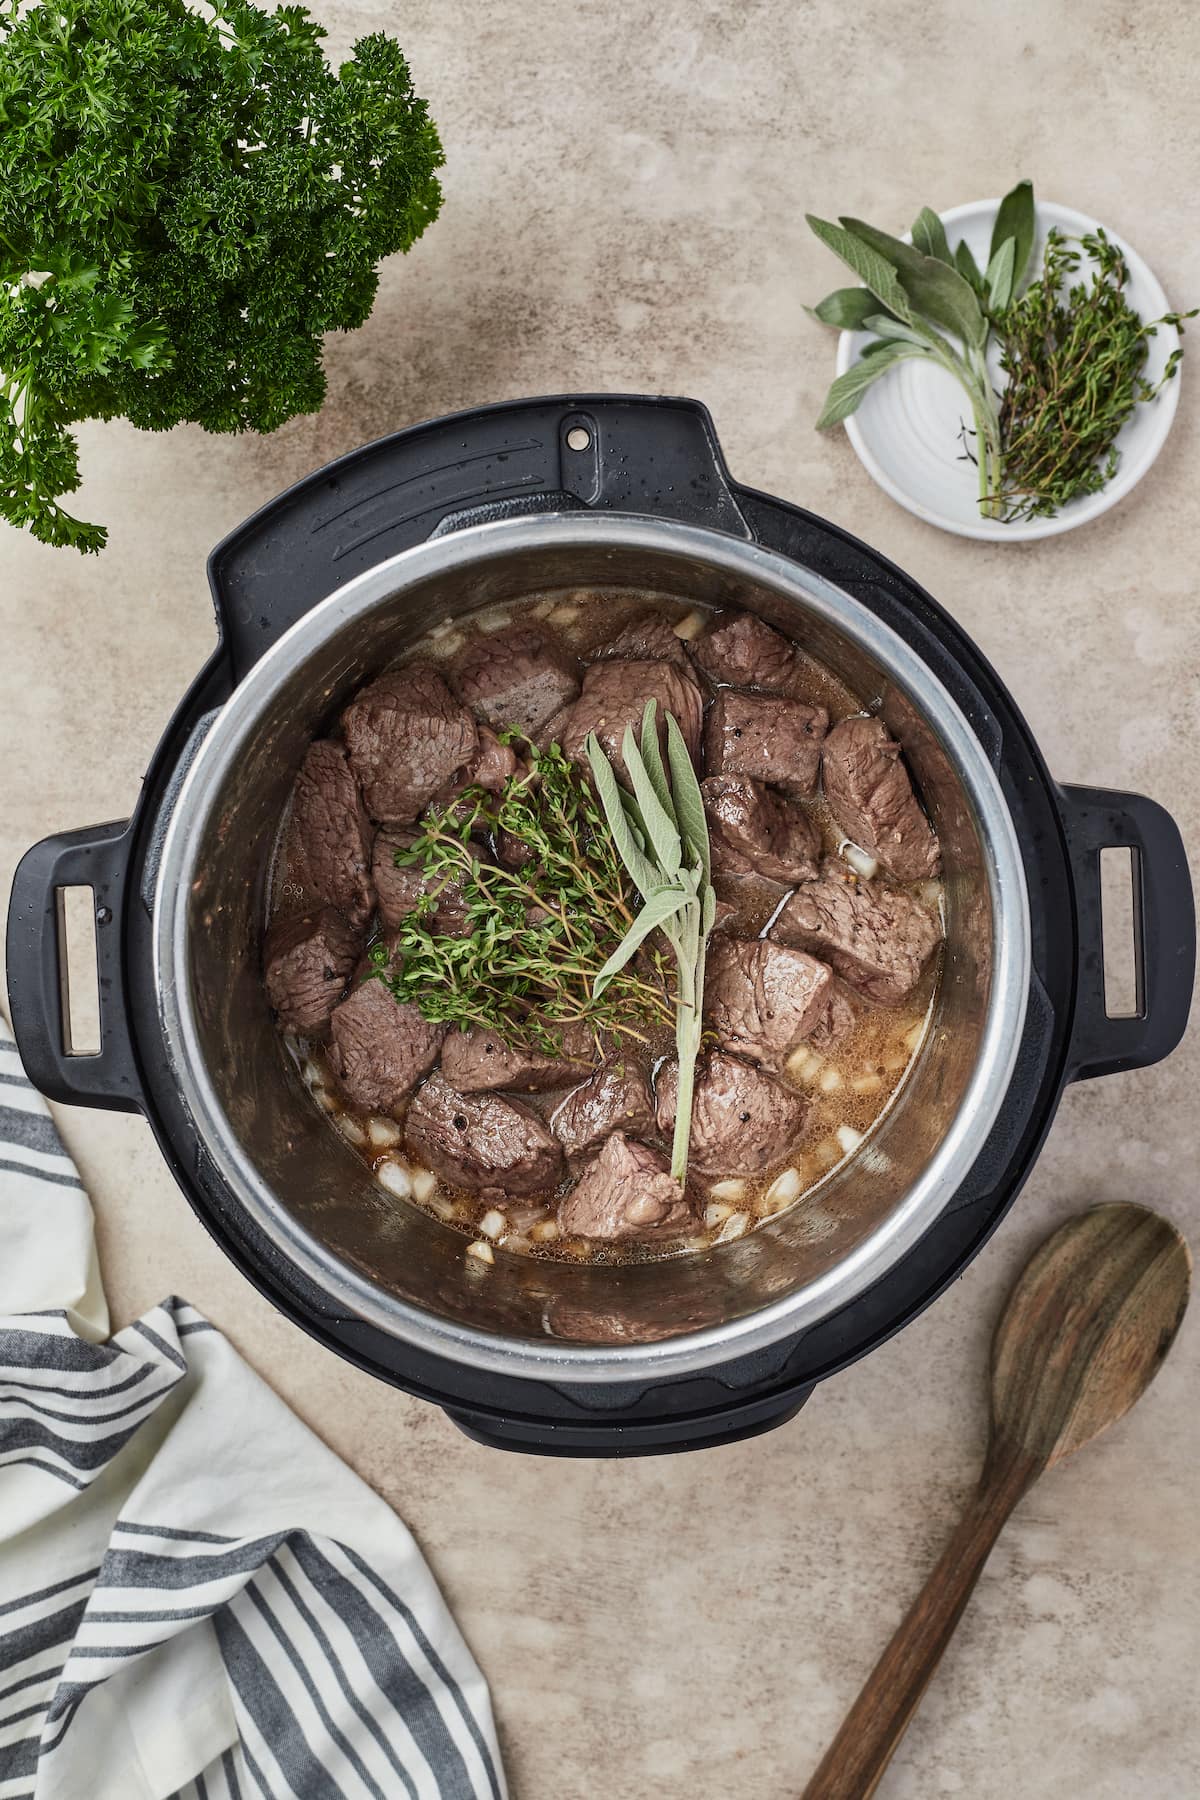 Browned beef chunks are added to an Instant Pot with onions, garlic, and herbs.